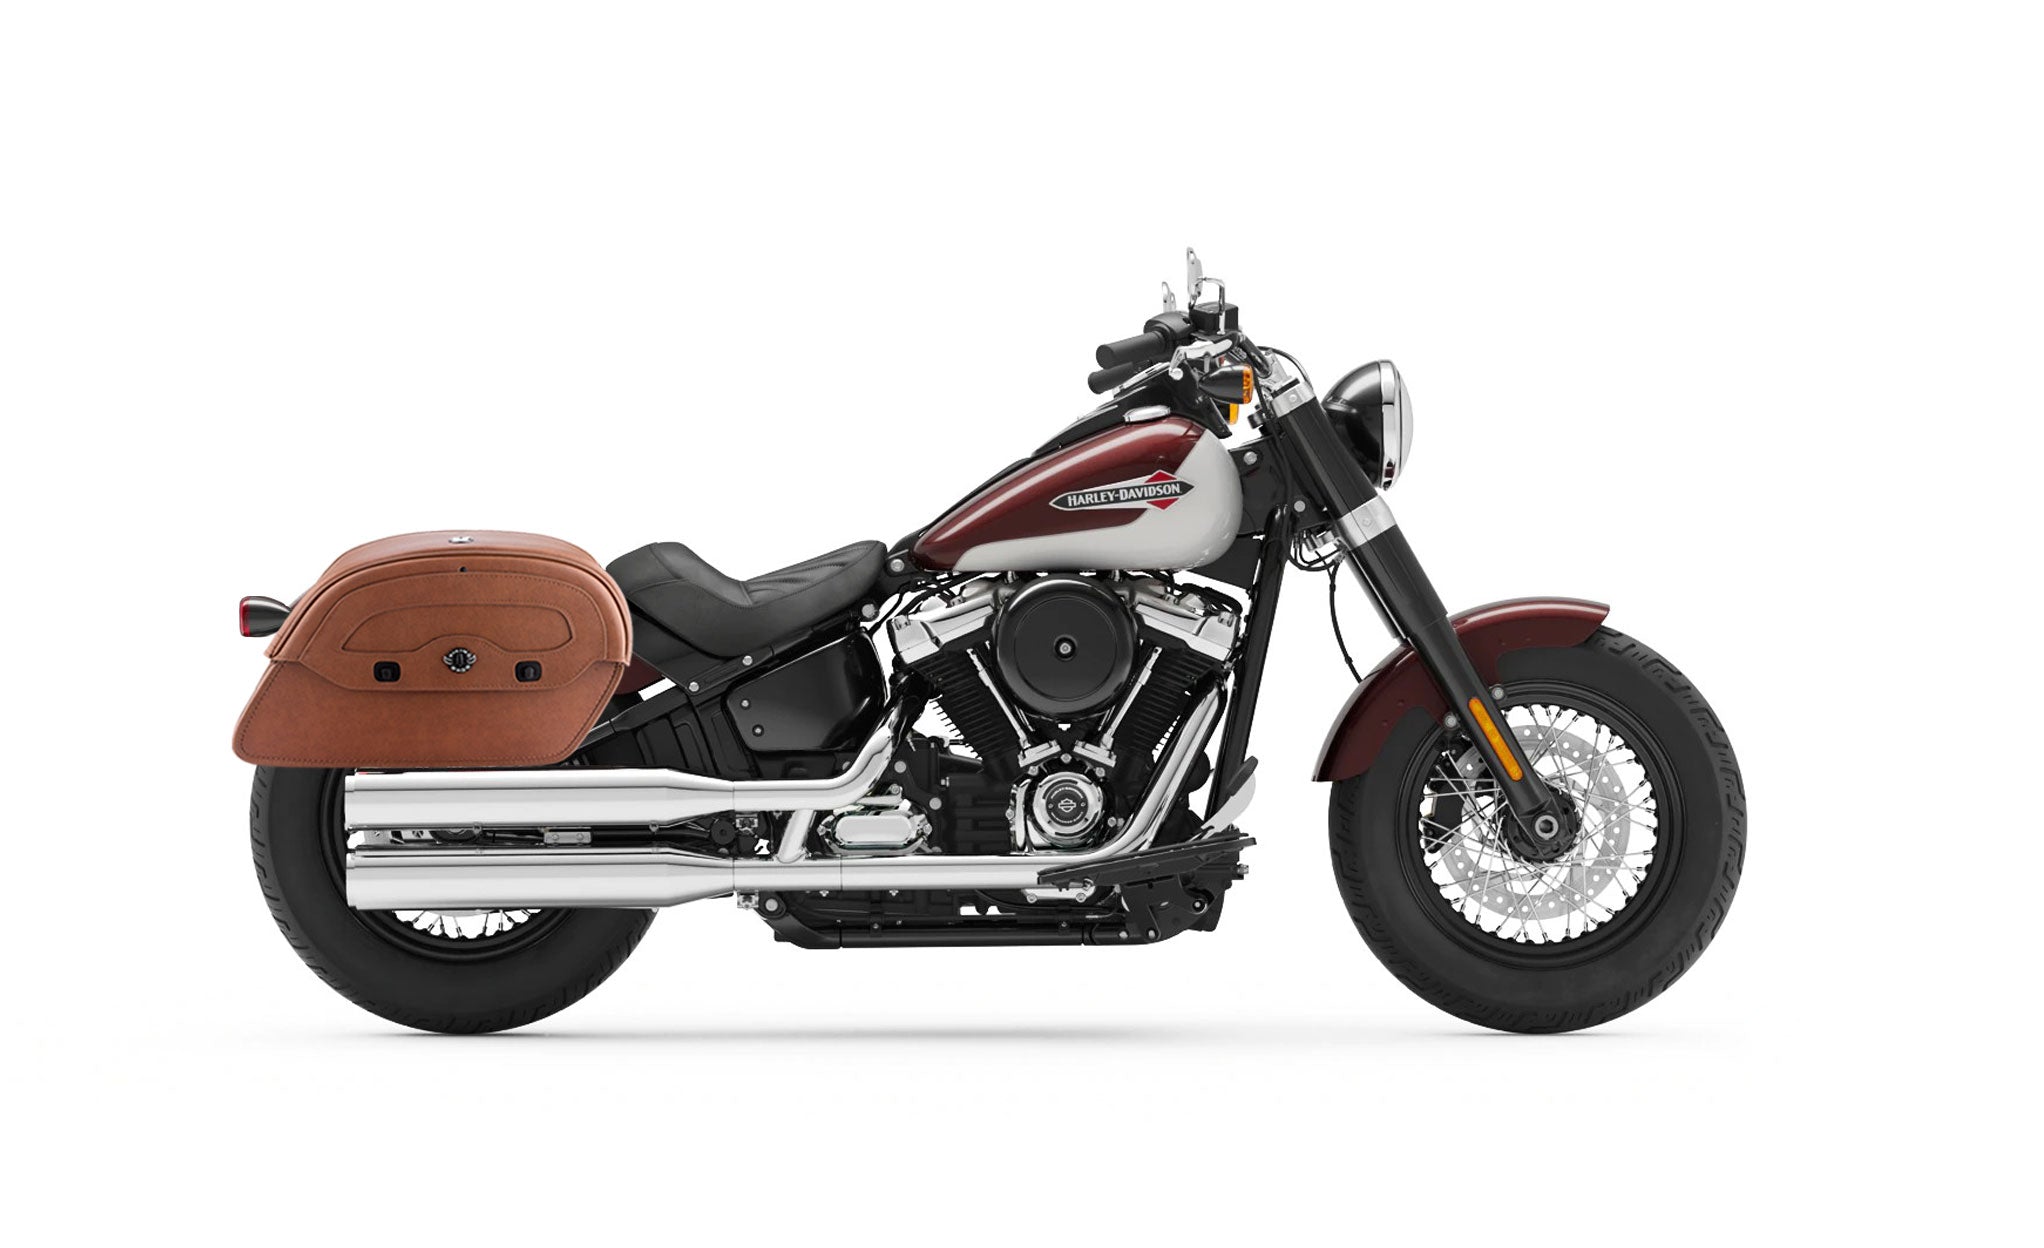 Viking Warrior Brown Large Leather Motorcycle Saddlebags for Harley Softail Slim Bag on Bike View @expand